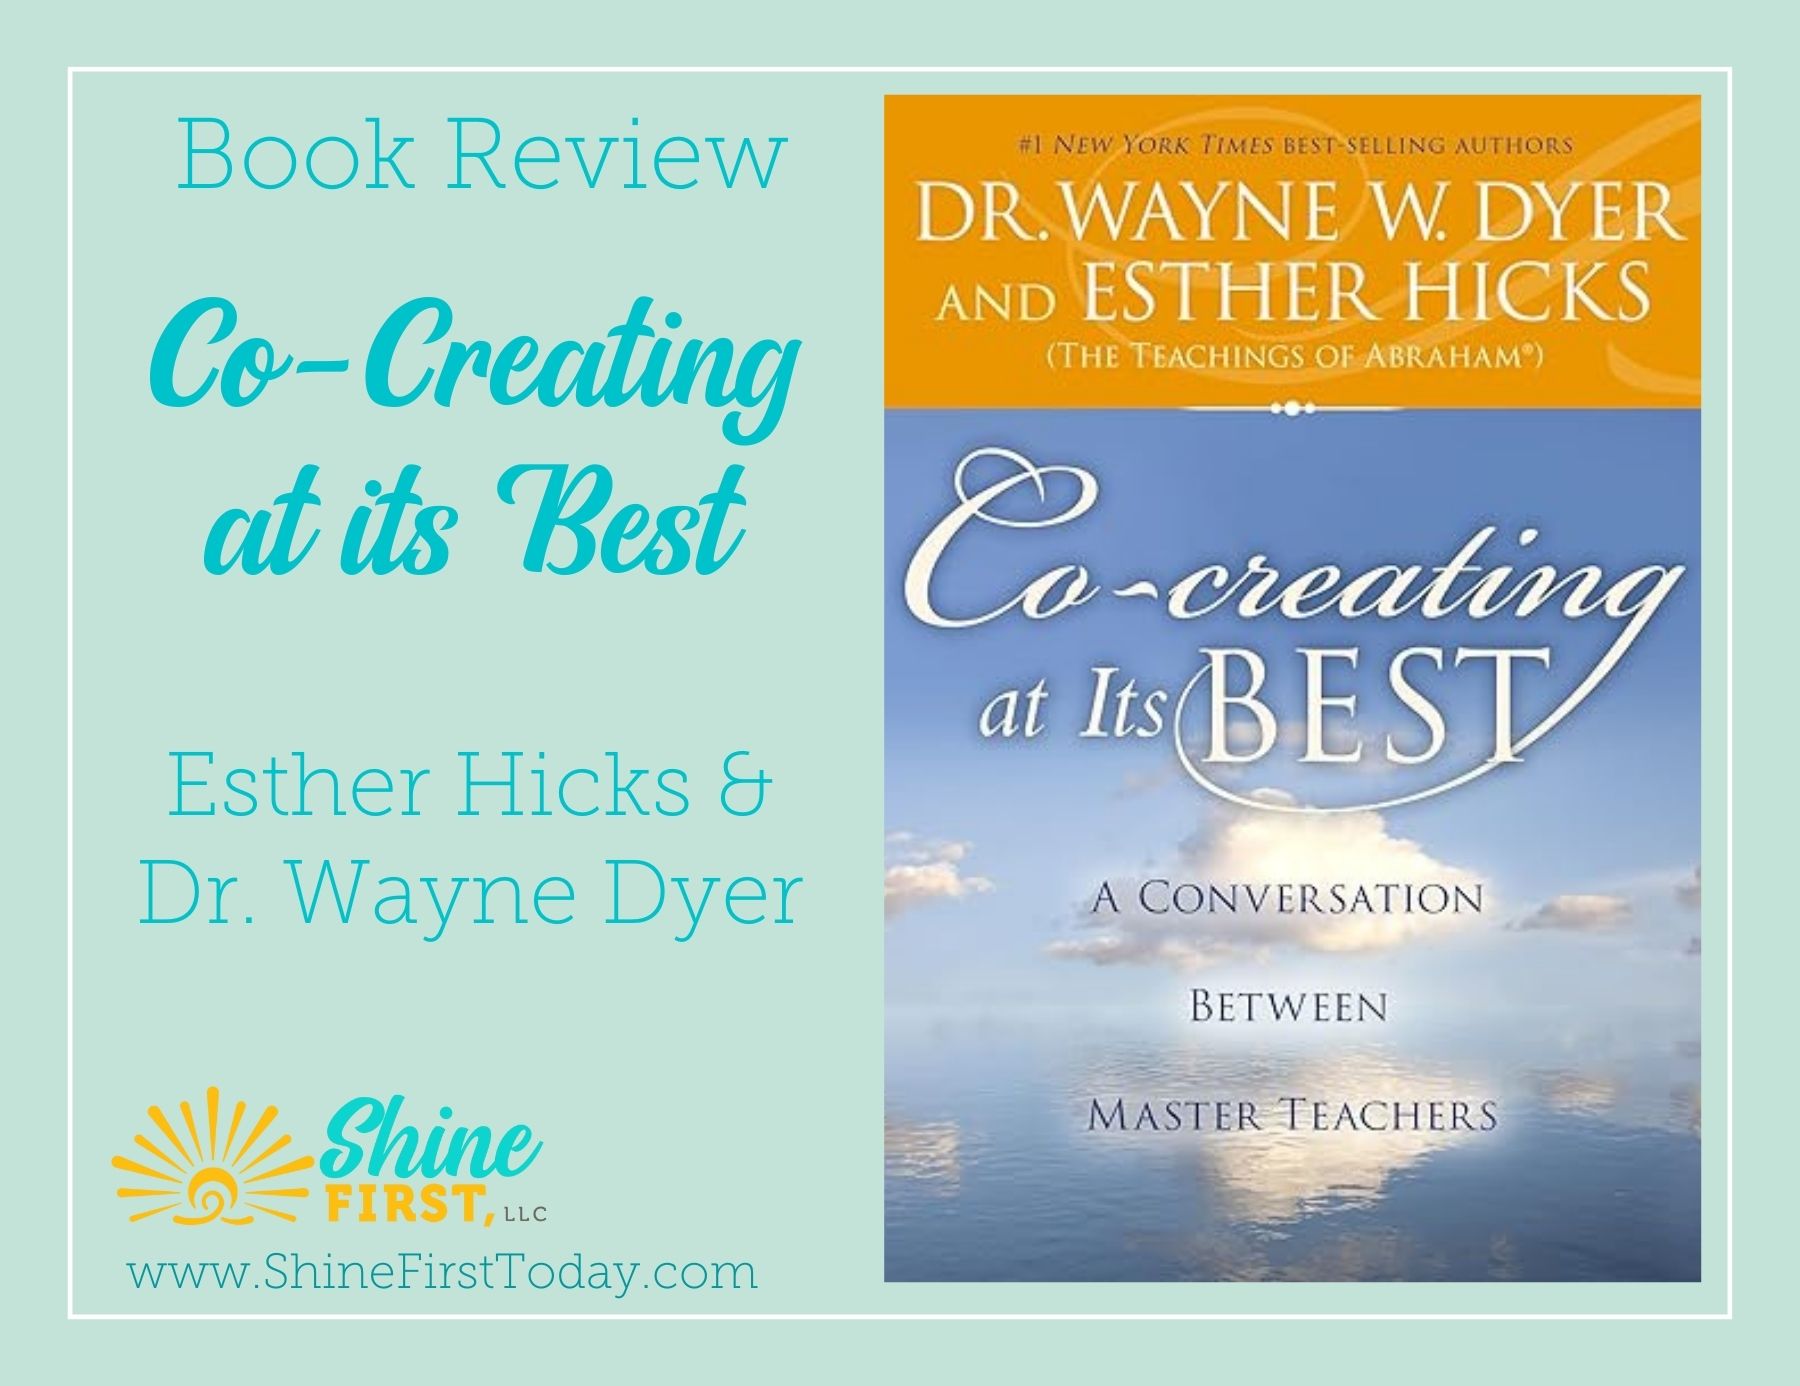 A Convergence of Spiritual Mastery: Book Review of ‘Co-Creation at its BEST’ by Esther Hicks and Dr. Wayne Dyer